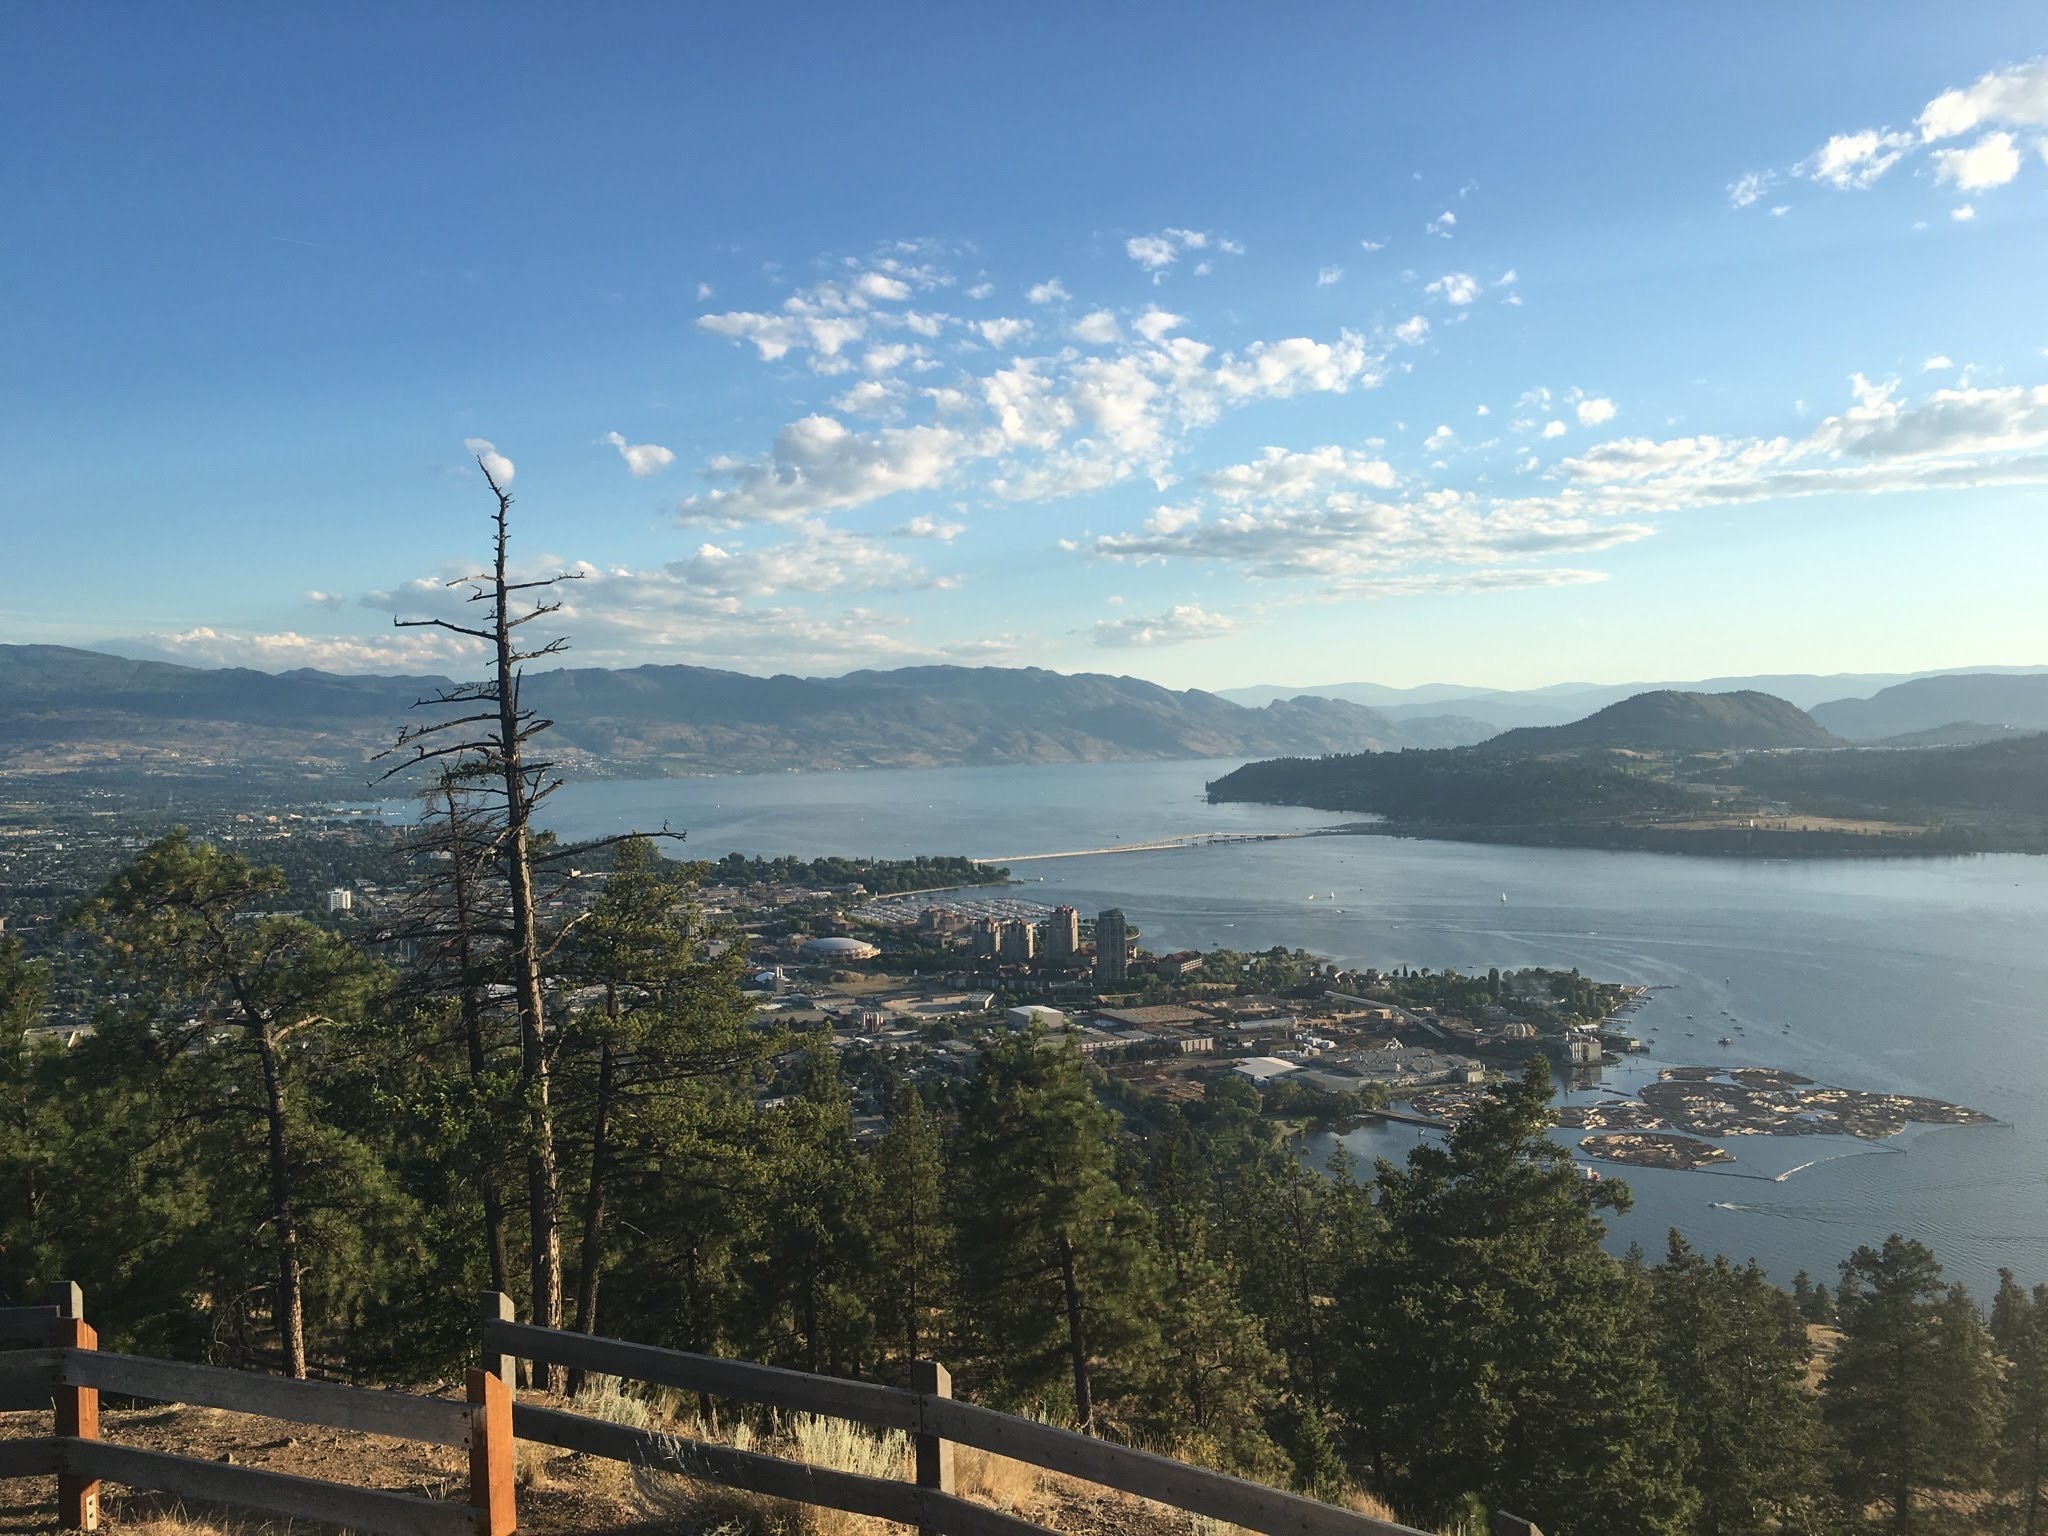 View of downtown Kelowna from Knox Mountain. Threes and a short fence in the foreground with a city view, Okanagan Lake and a bridge in the background under a blue sky with some clouds.